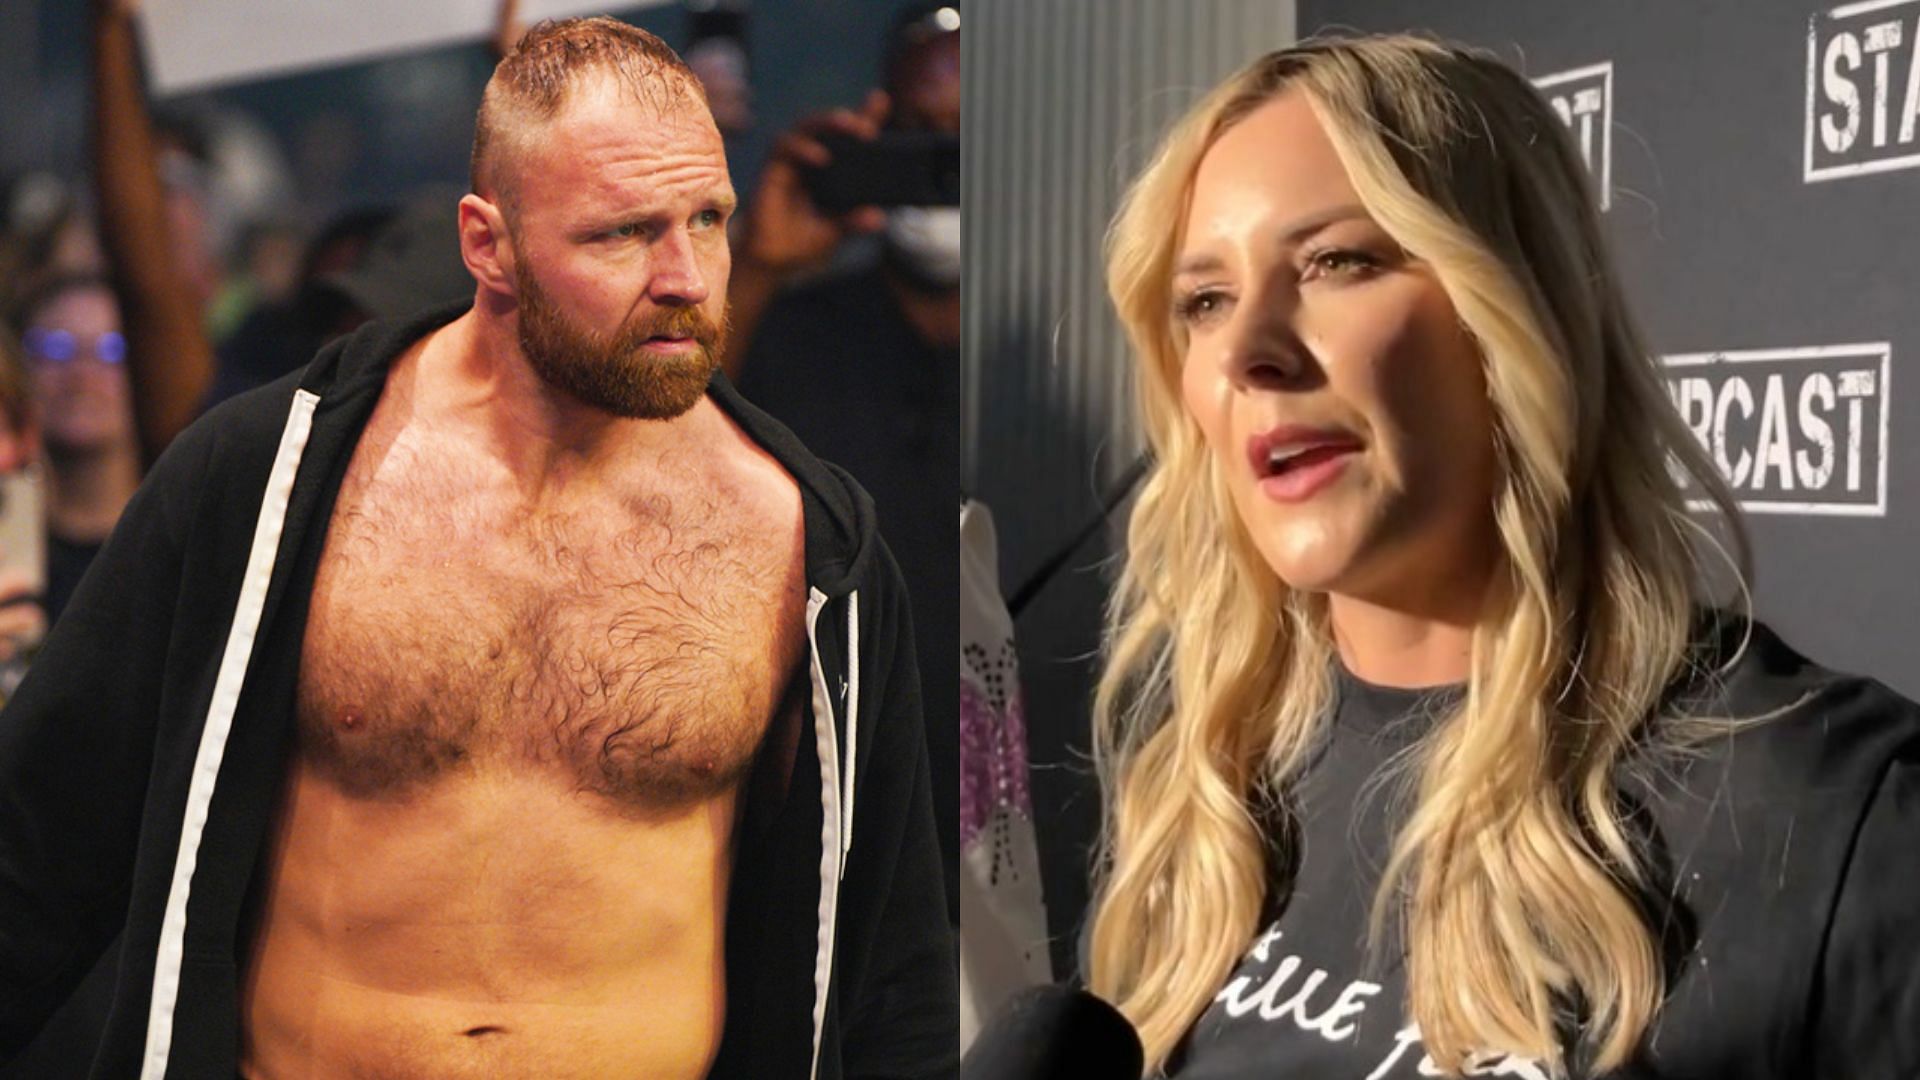 Jon Moxley (left) and Renee Paquette (right).